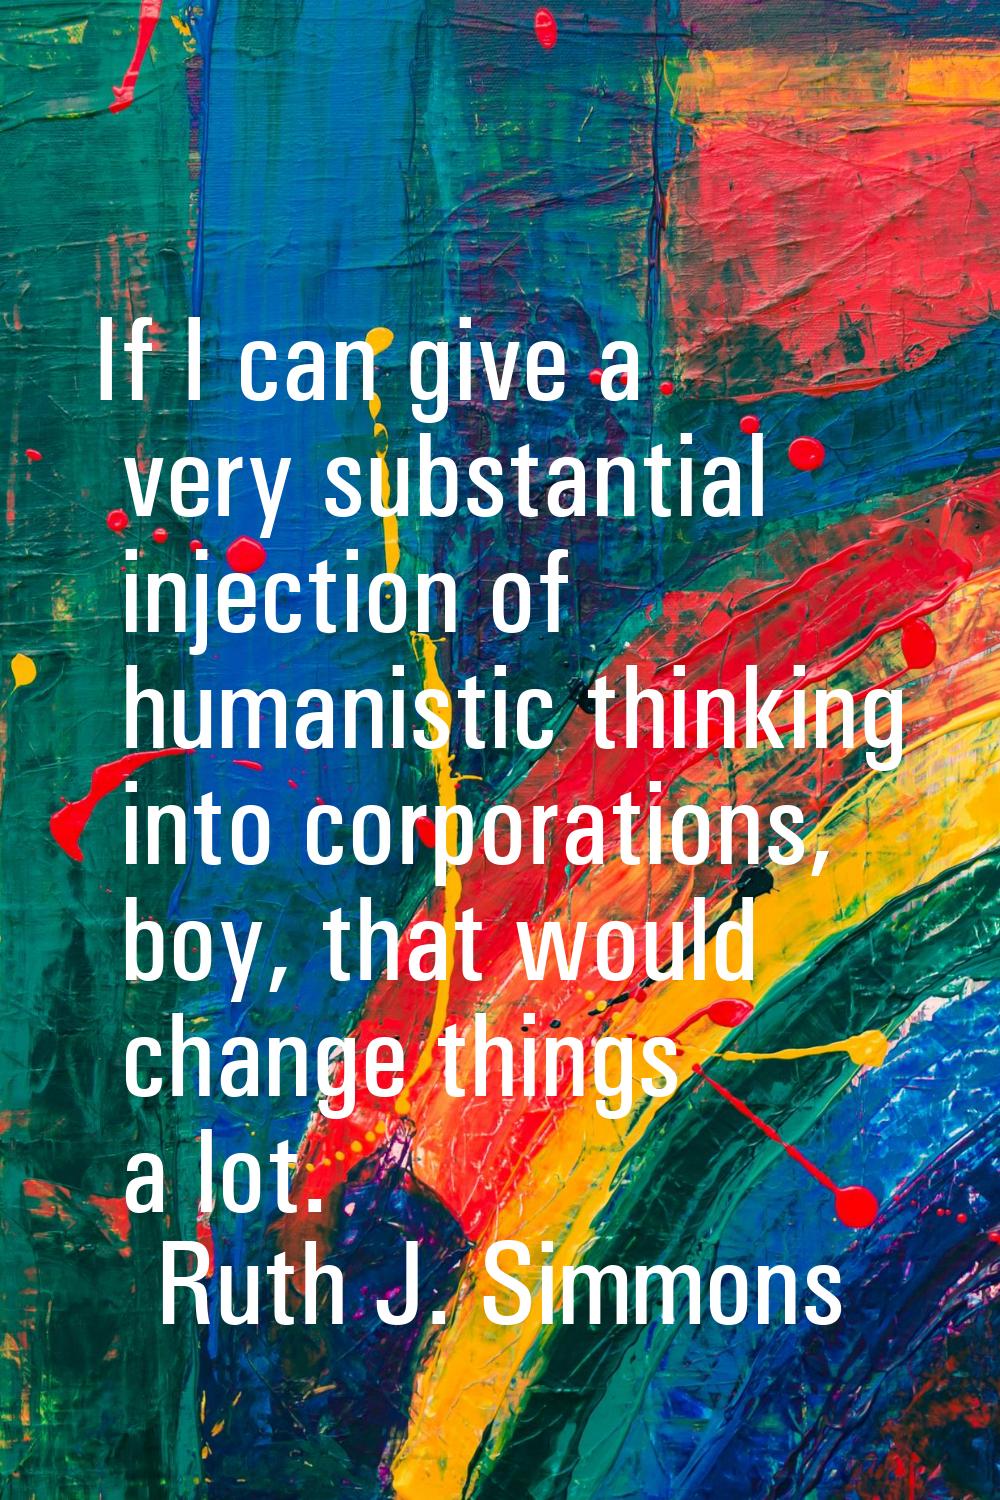 If I can give a very substantial injection of humanistic thinking into corporations, boy, that woul